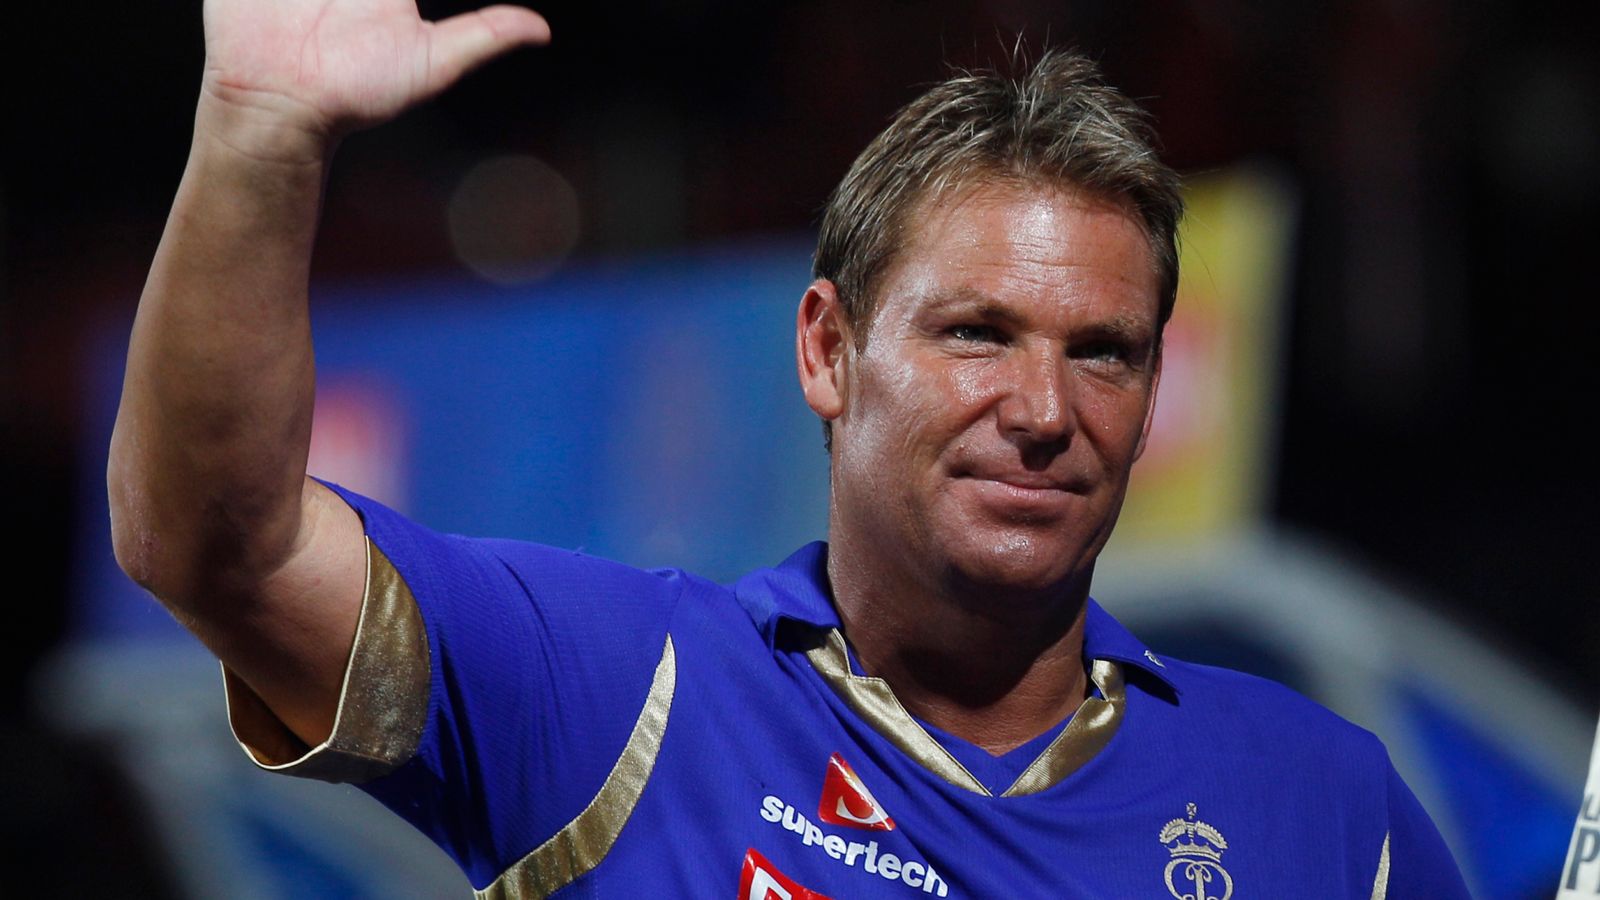 Shane Warne to be honoured by Rajasthan Royals in IPL on Saturday, players  will wear custom shirts | Cricket News | Sky Sports